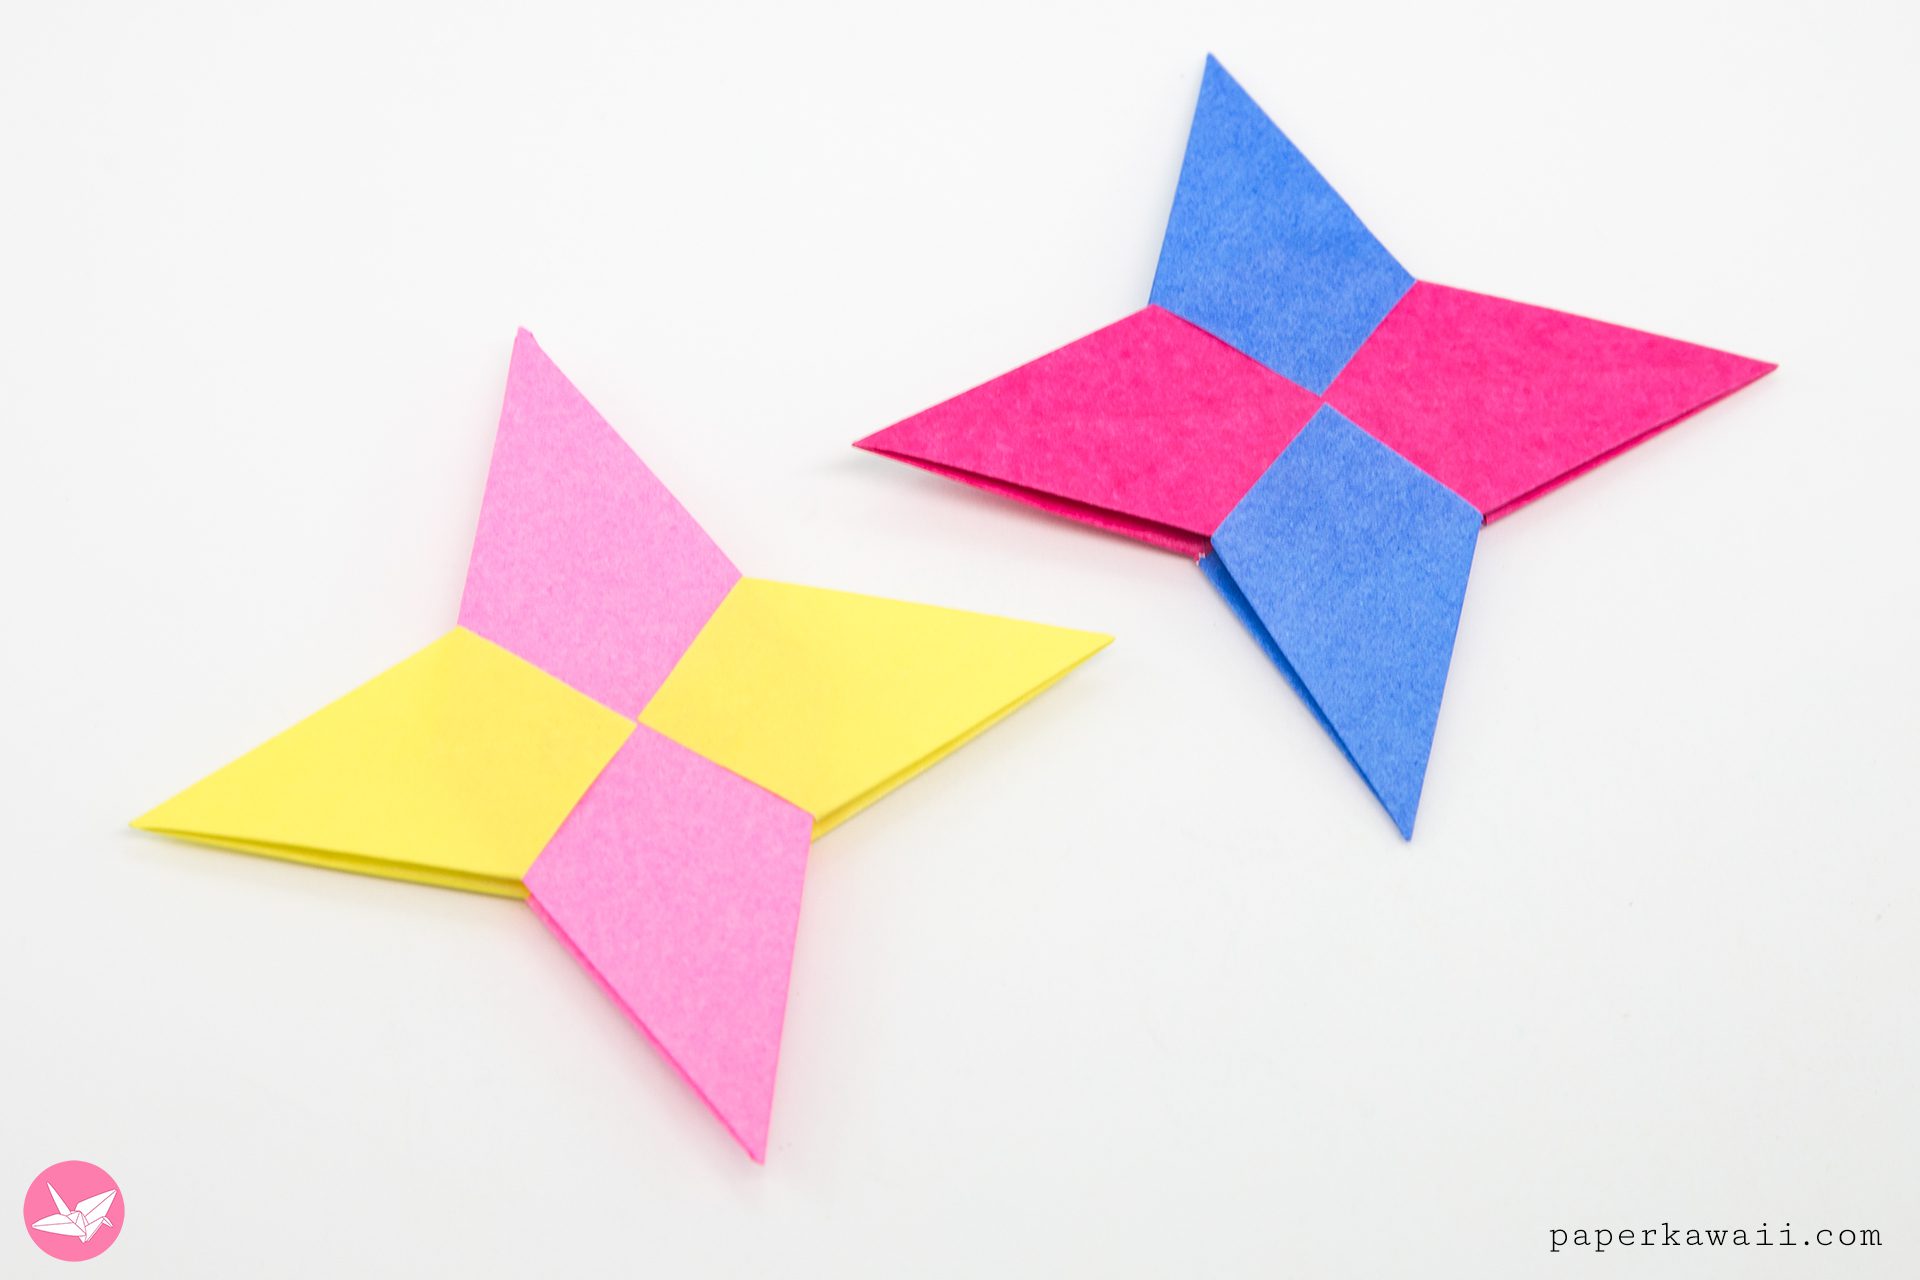 How to Make a Paper Ninja Star (Shuriken) - How to Make Easy Origami